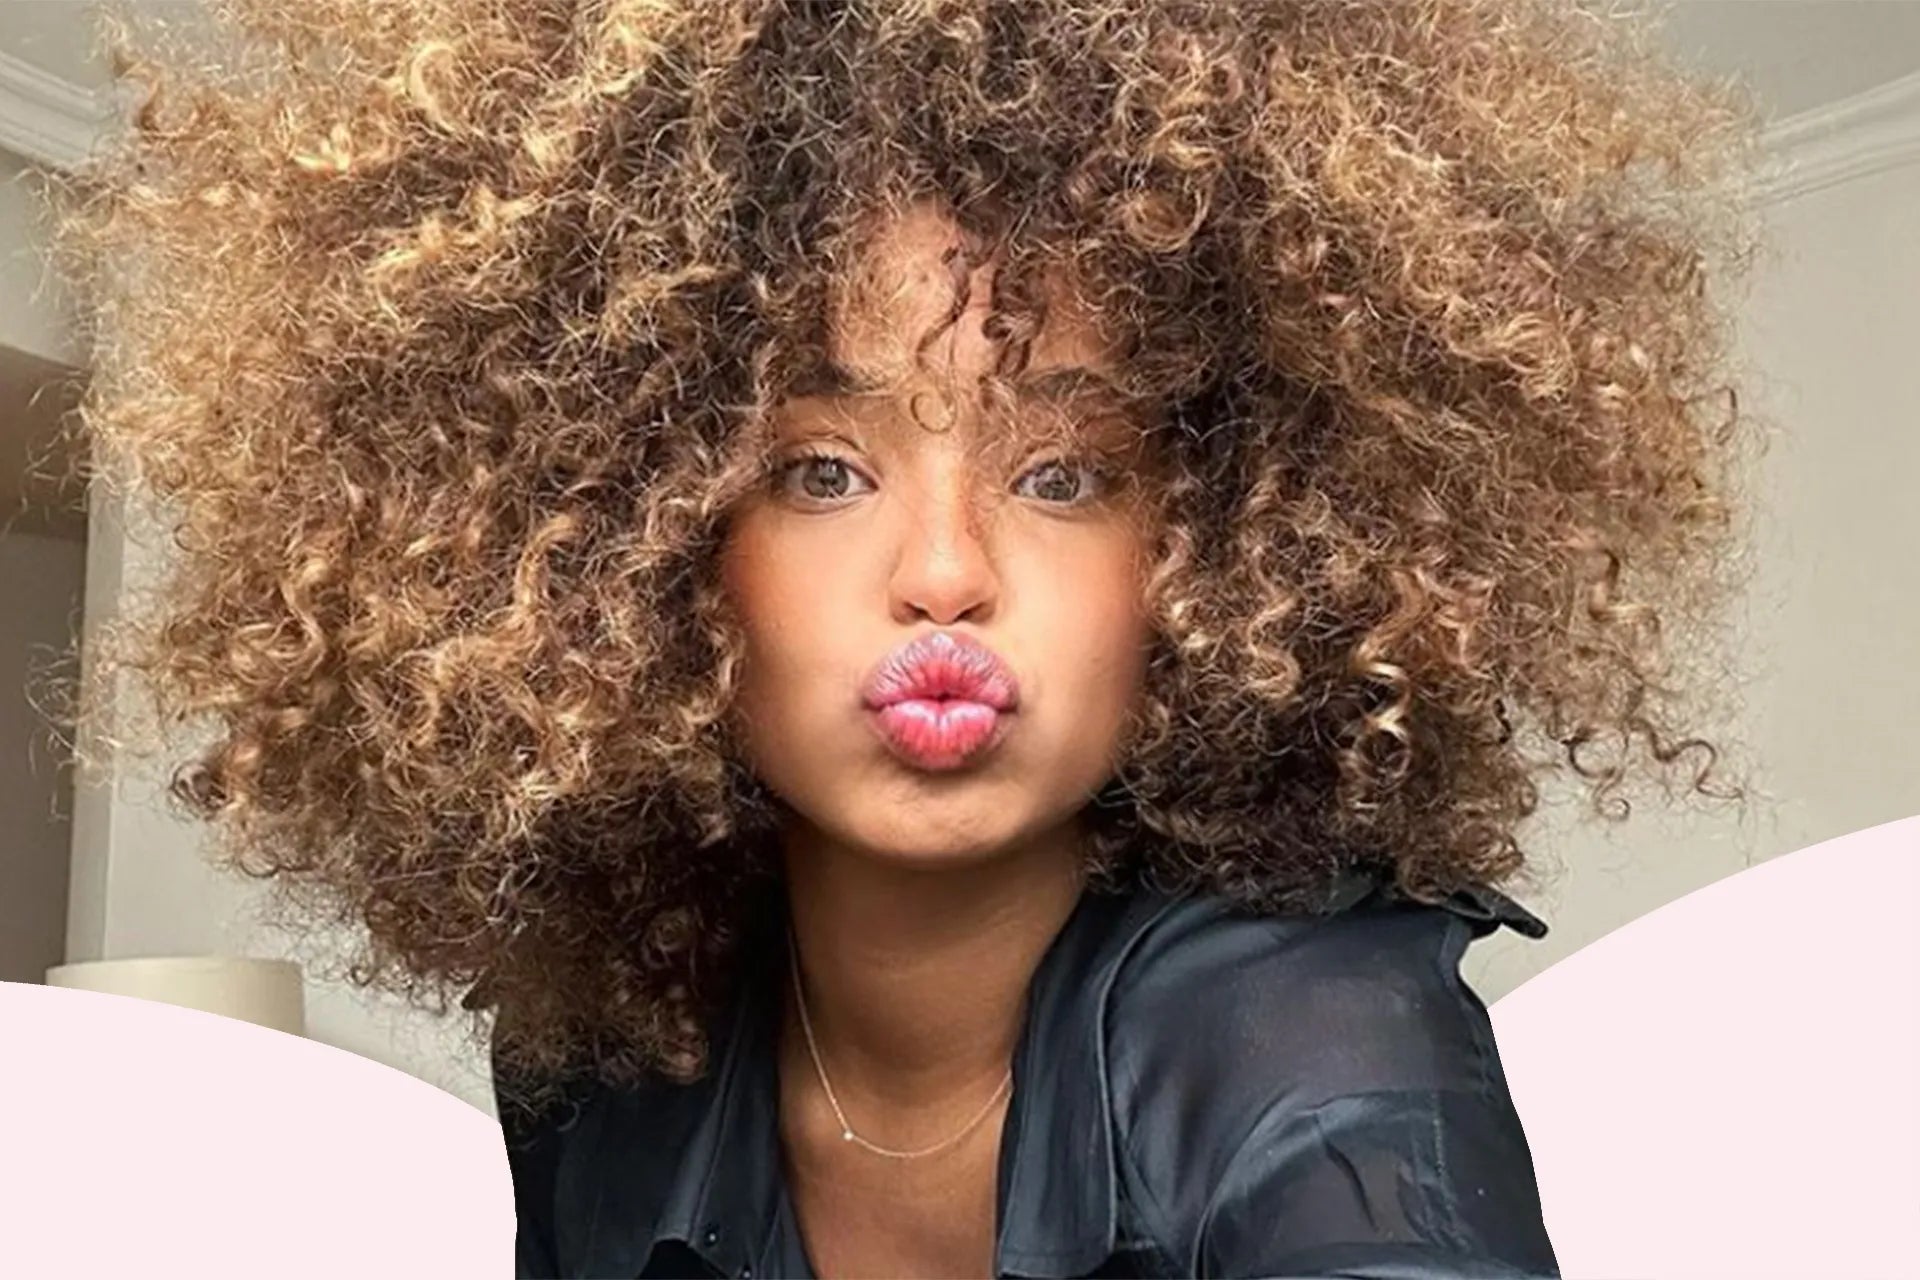 How to Take Care of Curly Hair: Our Top Tips